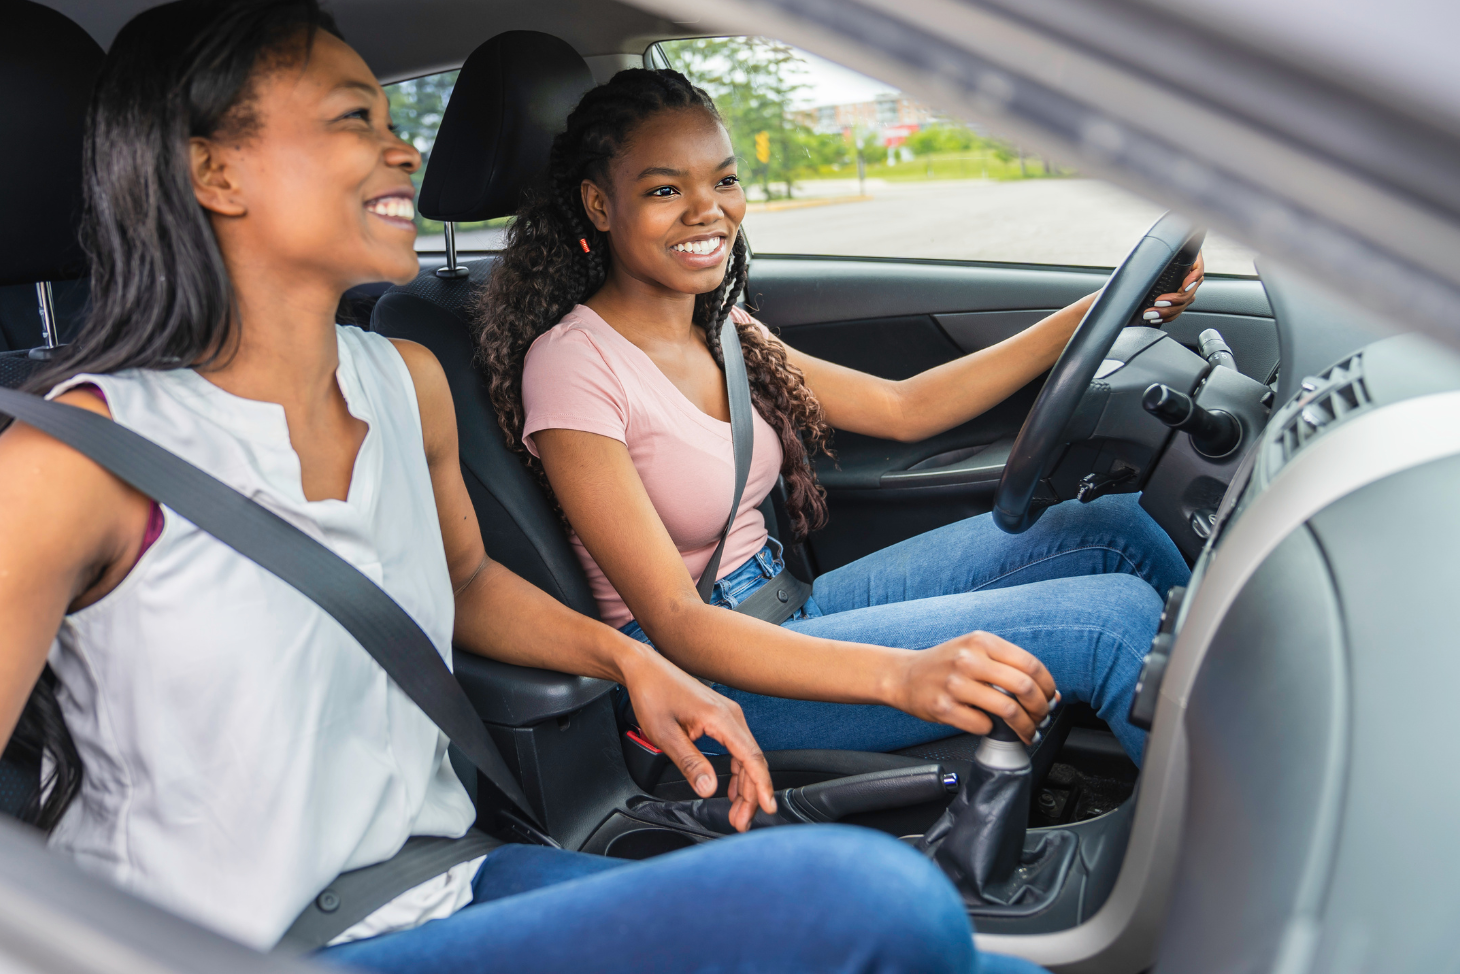 Image of a teen driving a car with her mother in the front passenger seat